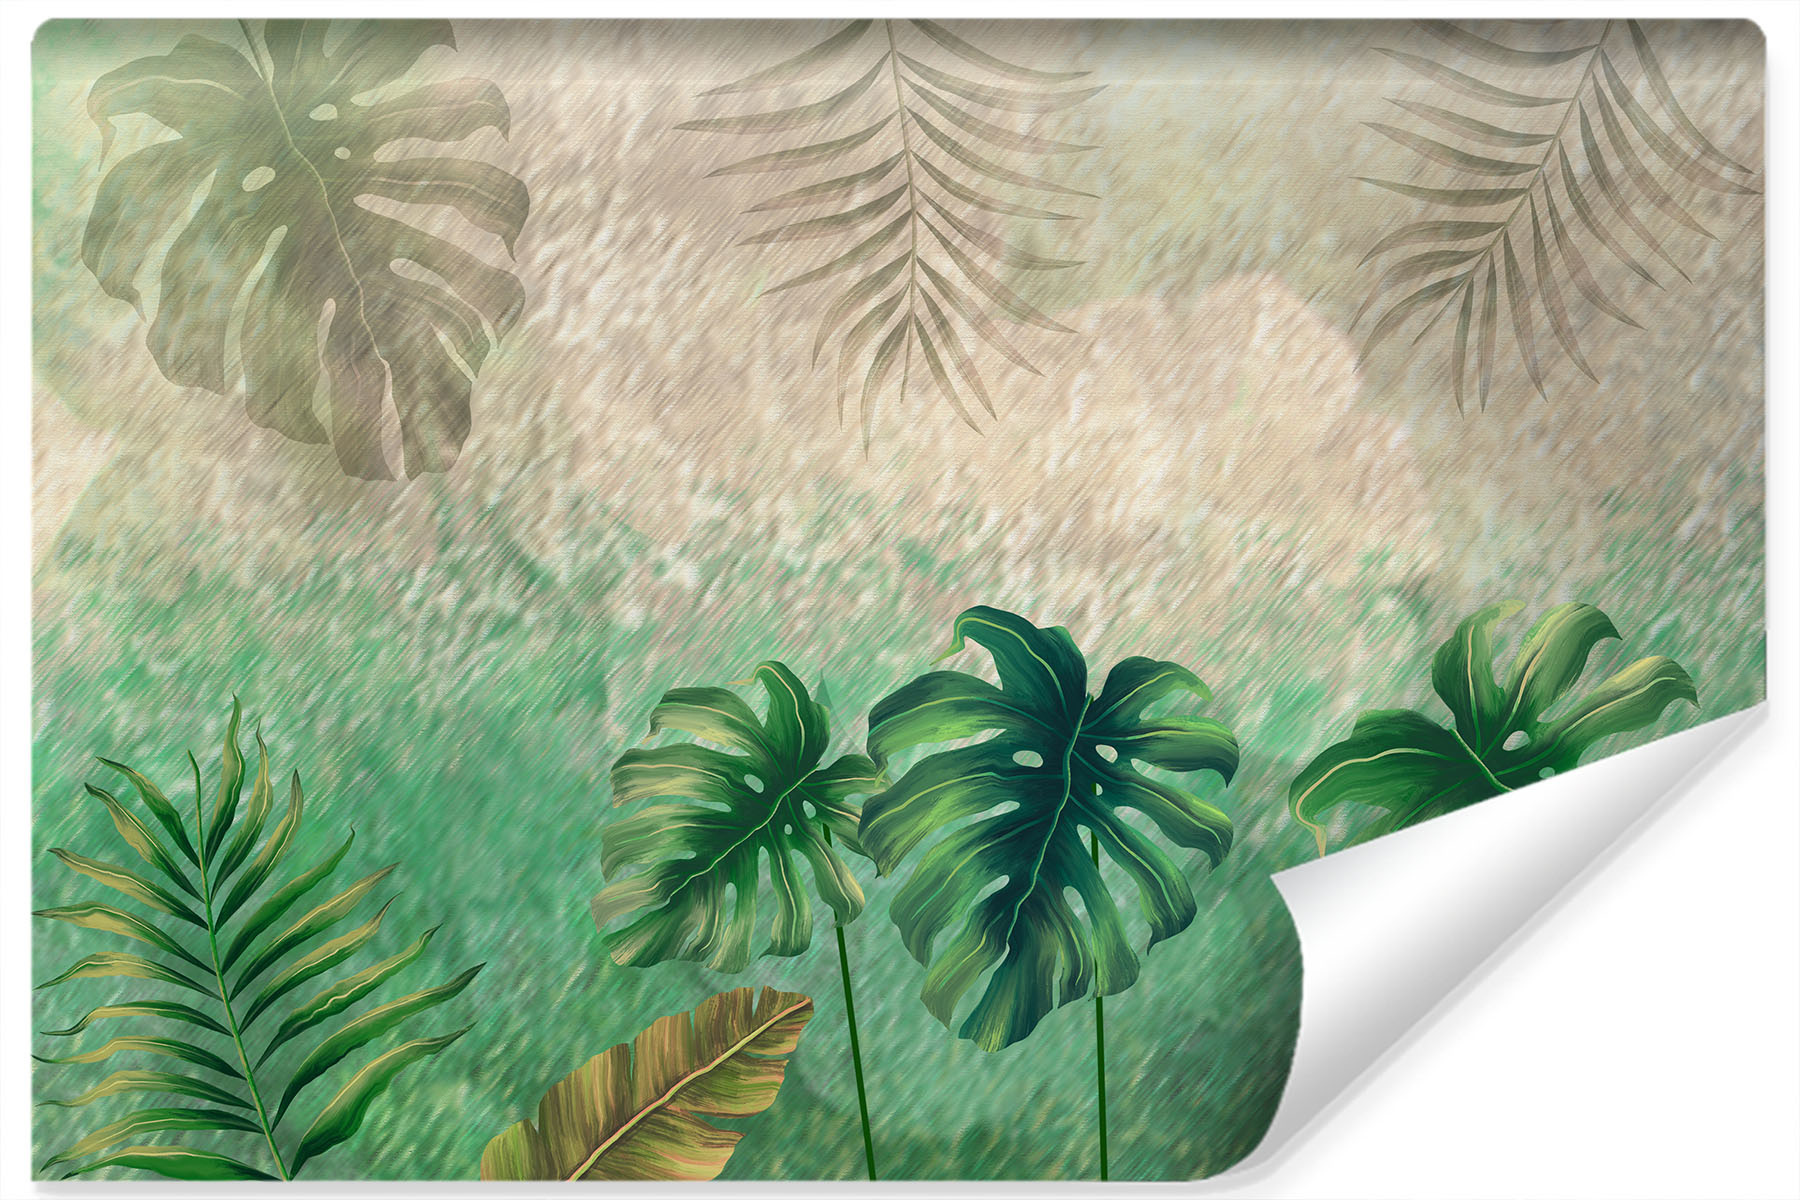 Photo wallpaper Tropical plants on an abstract background Non-woven 104x70,5 cm FT-3618-VEM